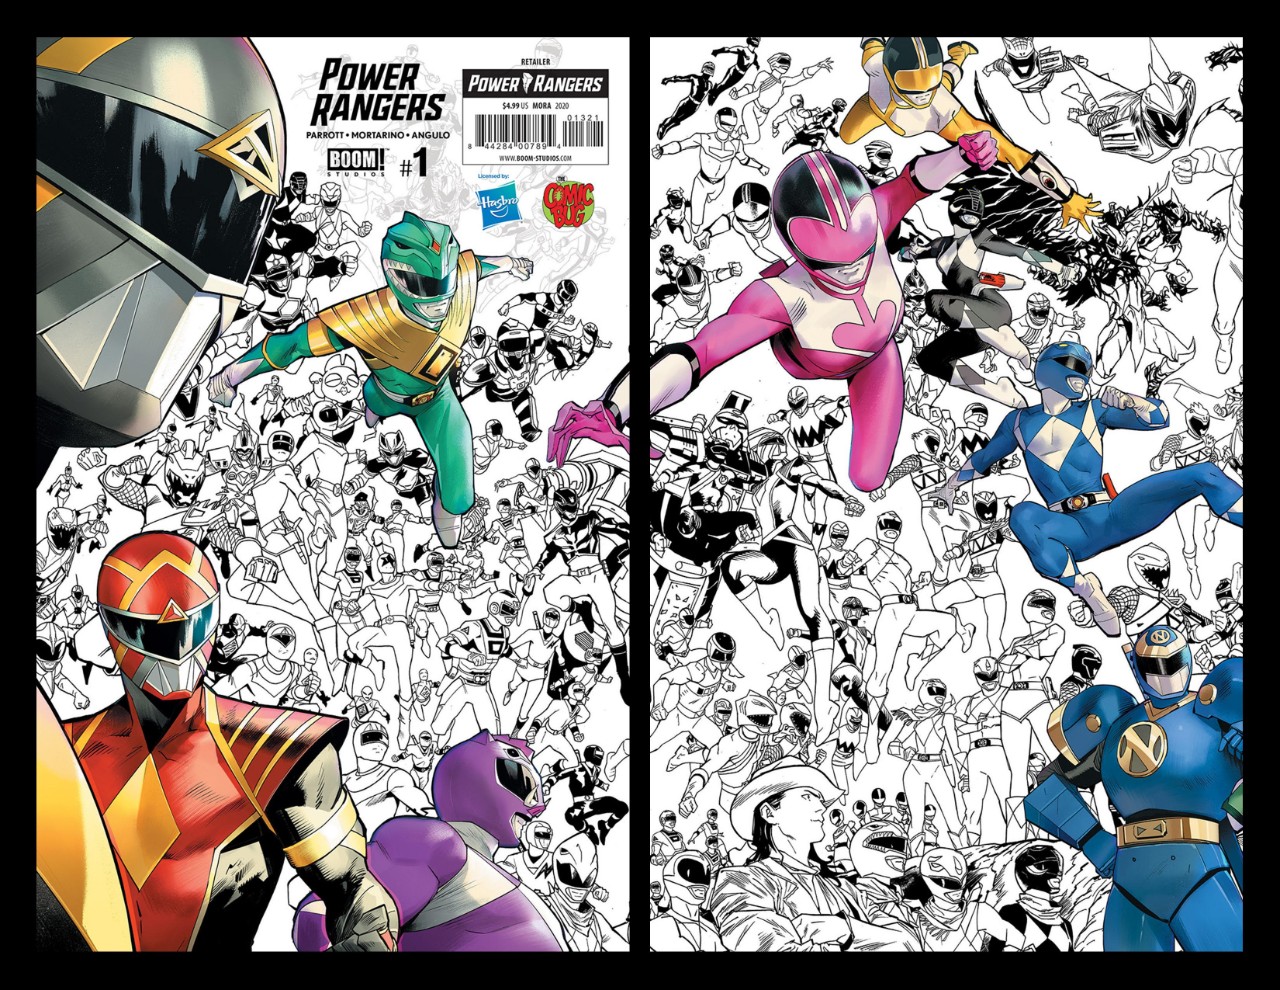 Power Rangers #1 The Comic Bug Exclusive Variant Cover Revealed